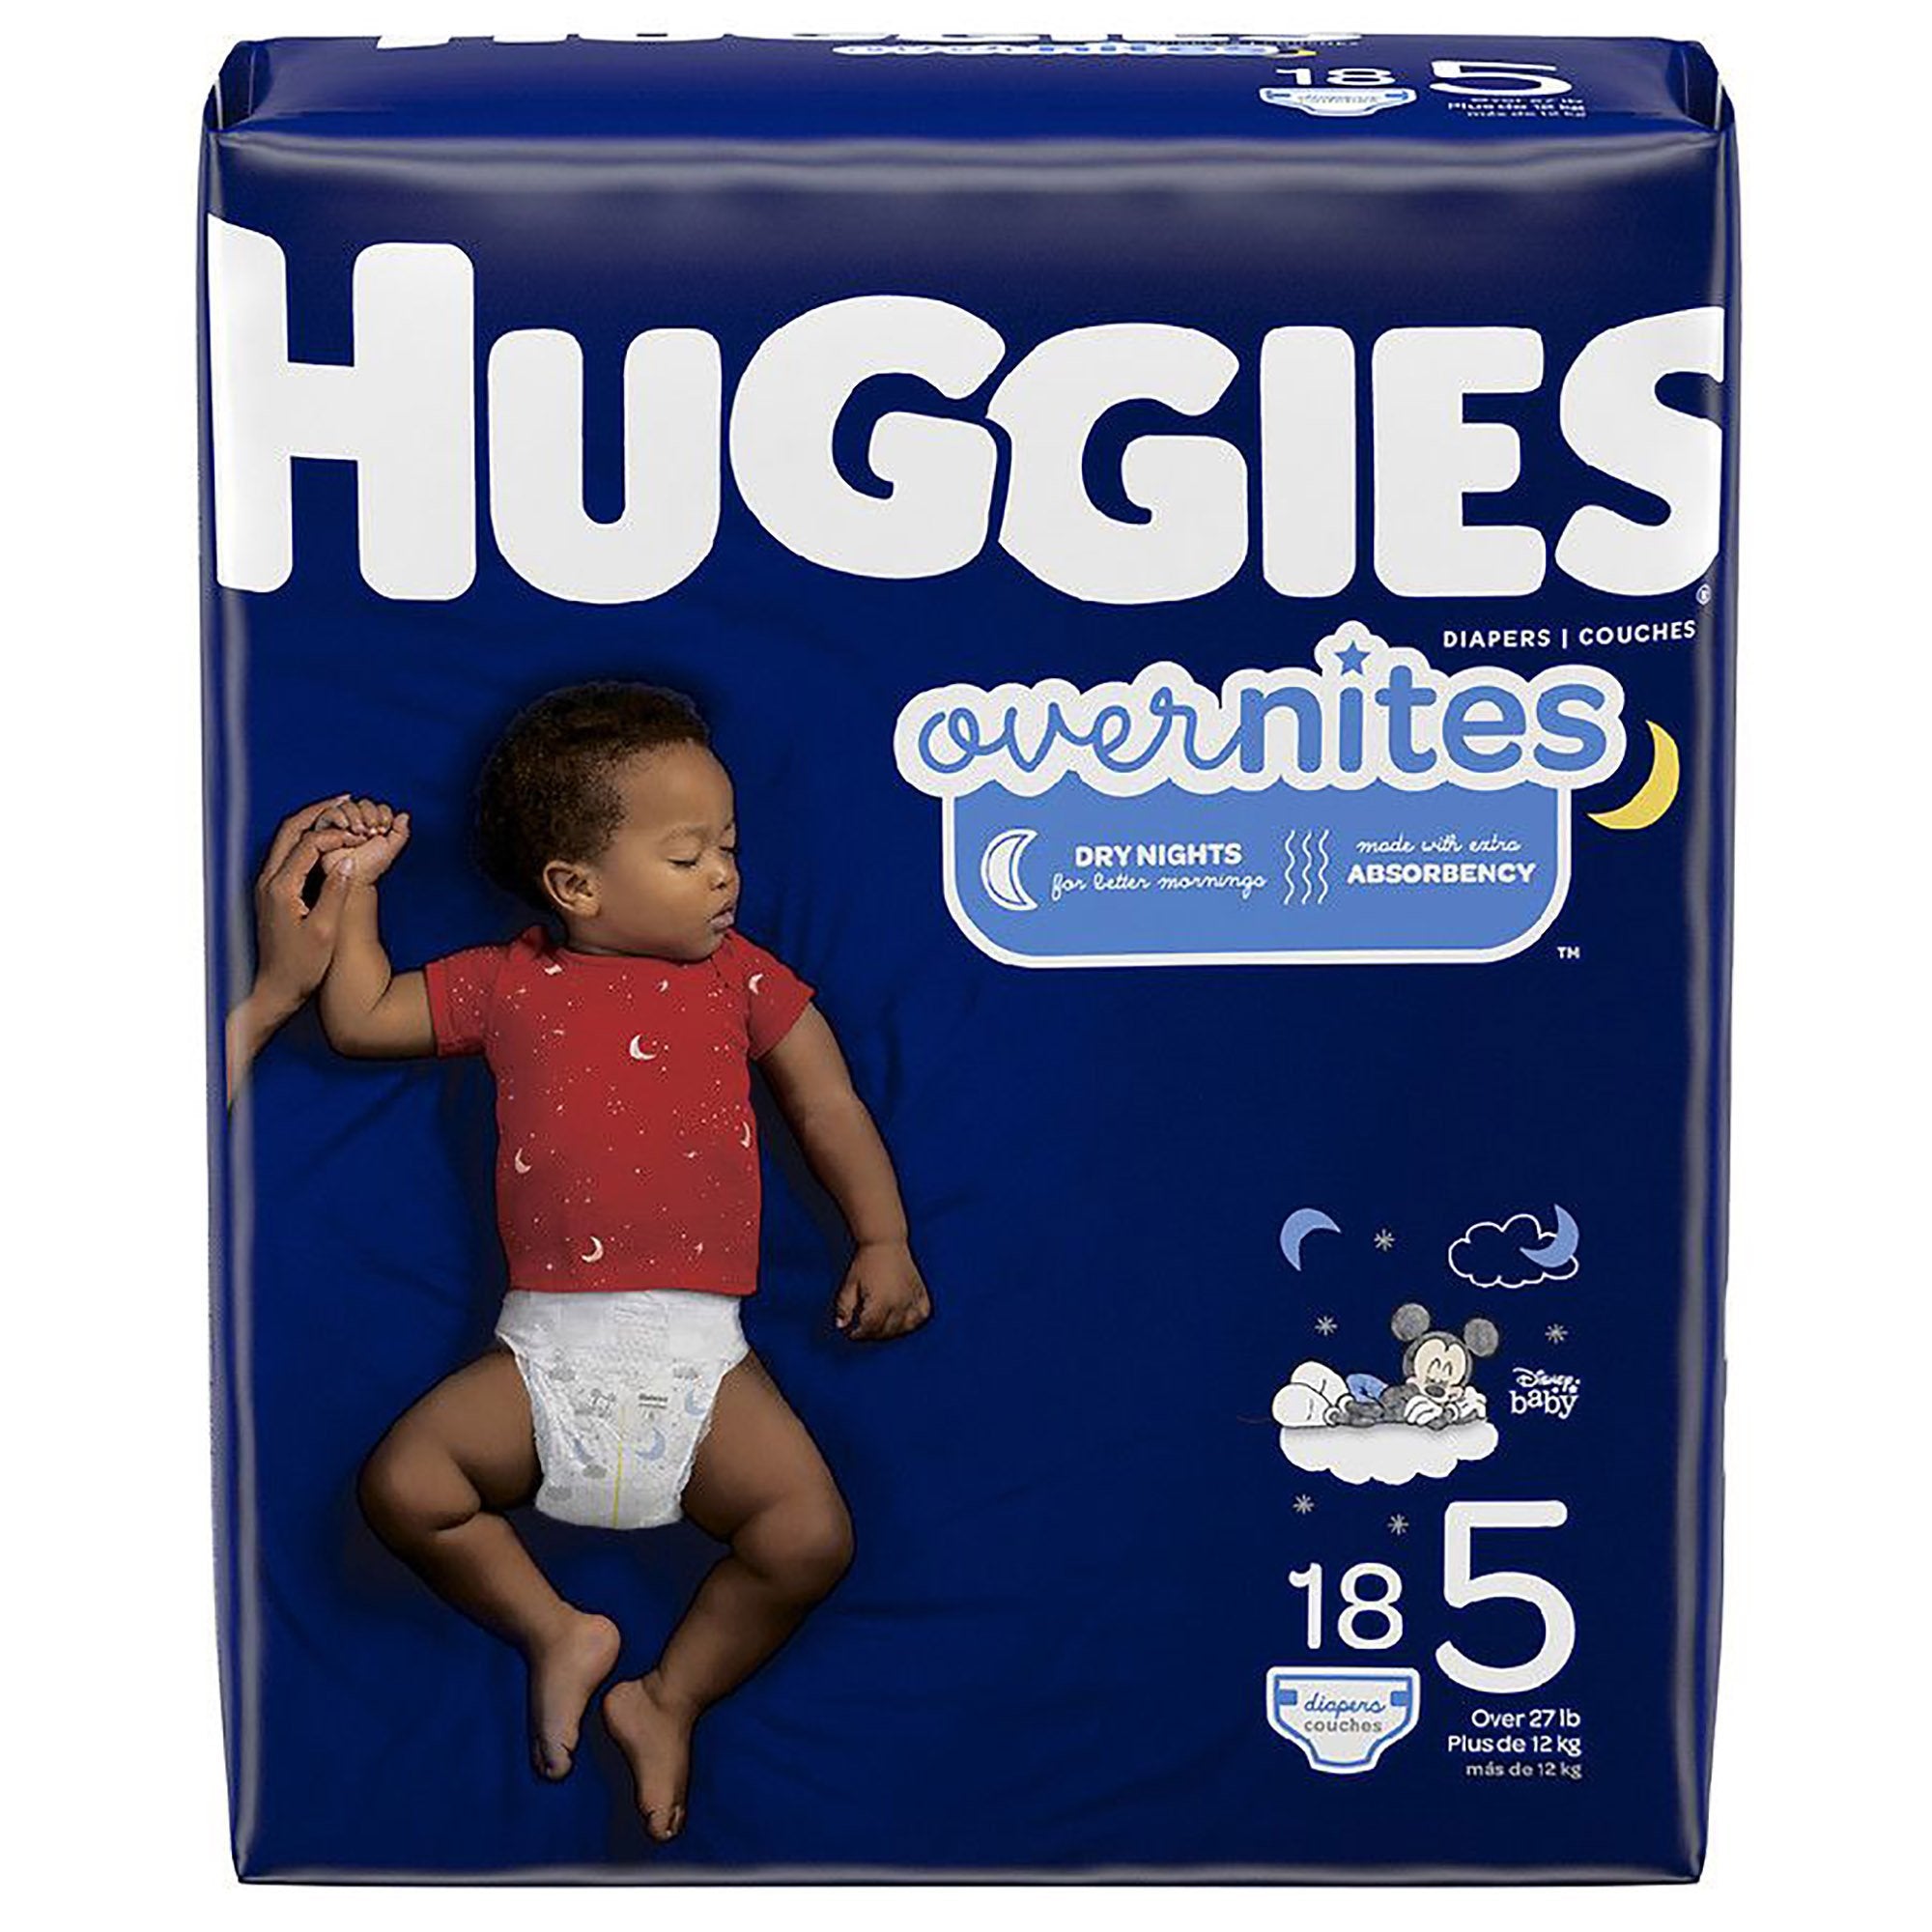 Unisex Baby Diaper Huggies Overnites Size 5 Disposable Heavy Absorbency